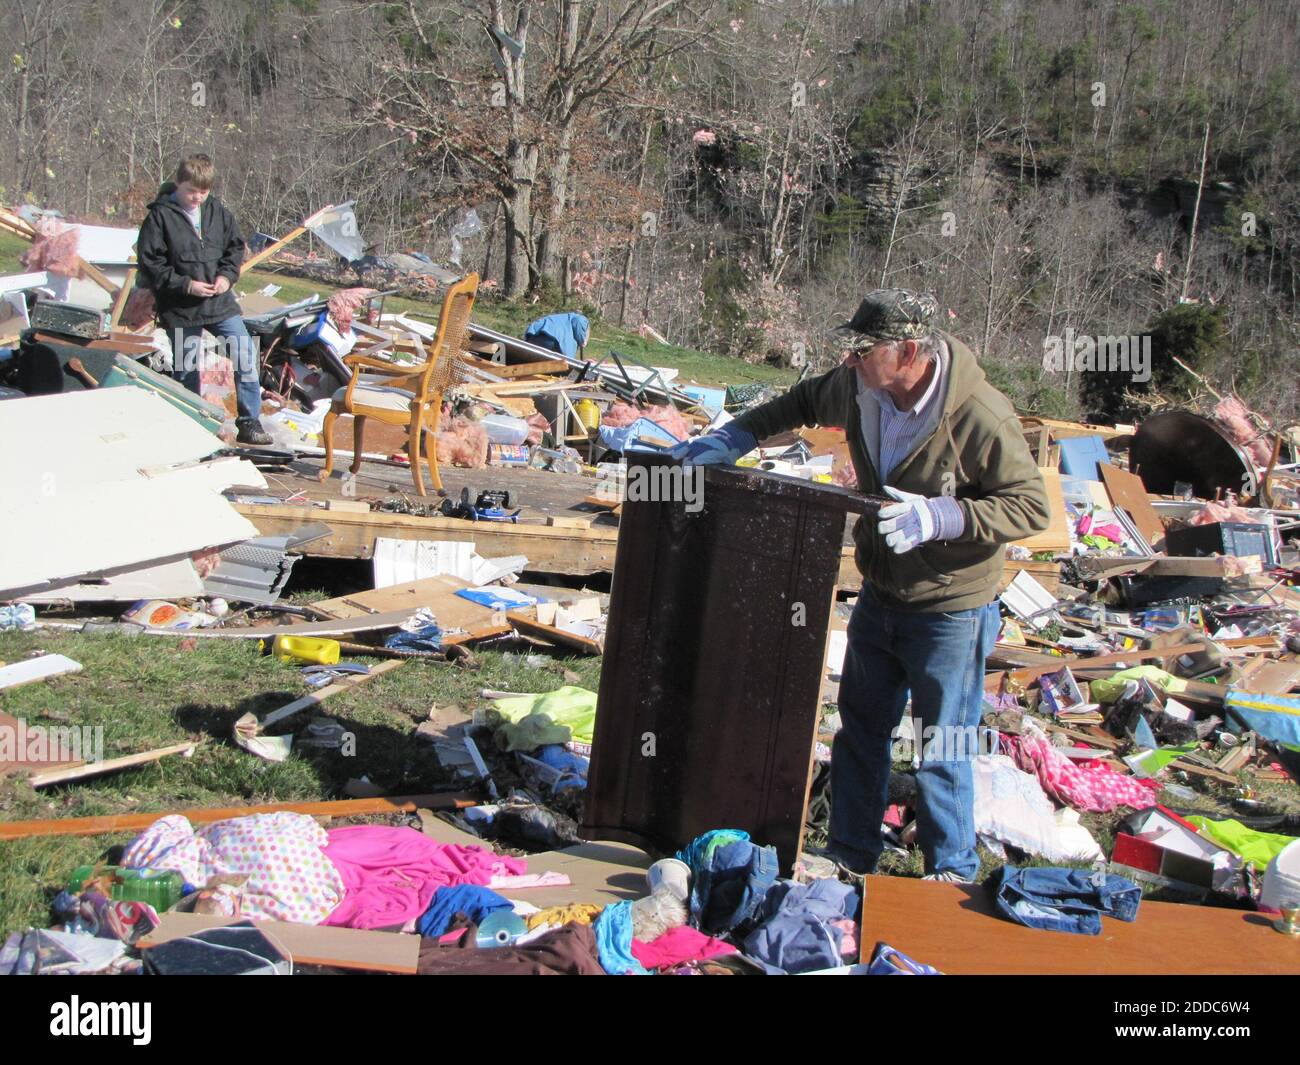 NO FILM, NO VIDEO, NO TV, NO DOCUMENTARY - Randall Chadwell attempts to salvage items on Saturday, March 3, 2012, from his mobile home, which was destroyed by a storm a day earlier in Laurel County, Kentucky. Photo by Bill Estep/Lexington Herald-Leader/MCT/ABACAPRESS.COM Stock Photo